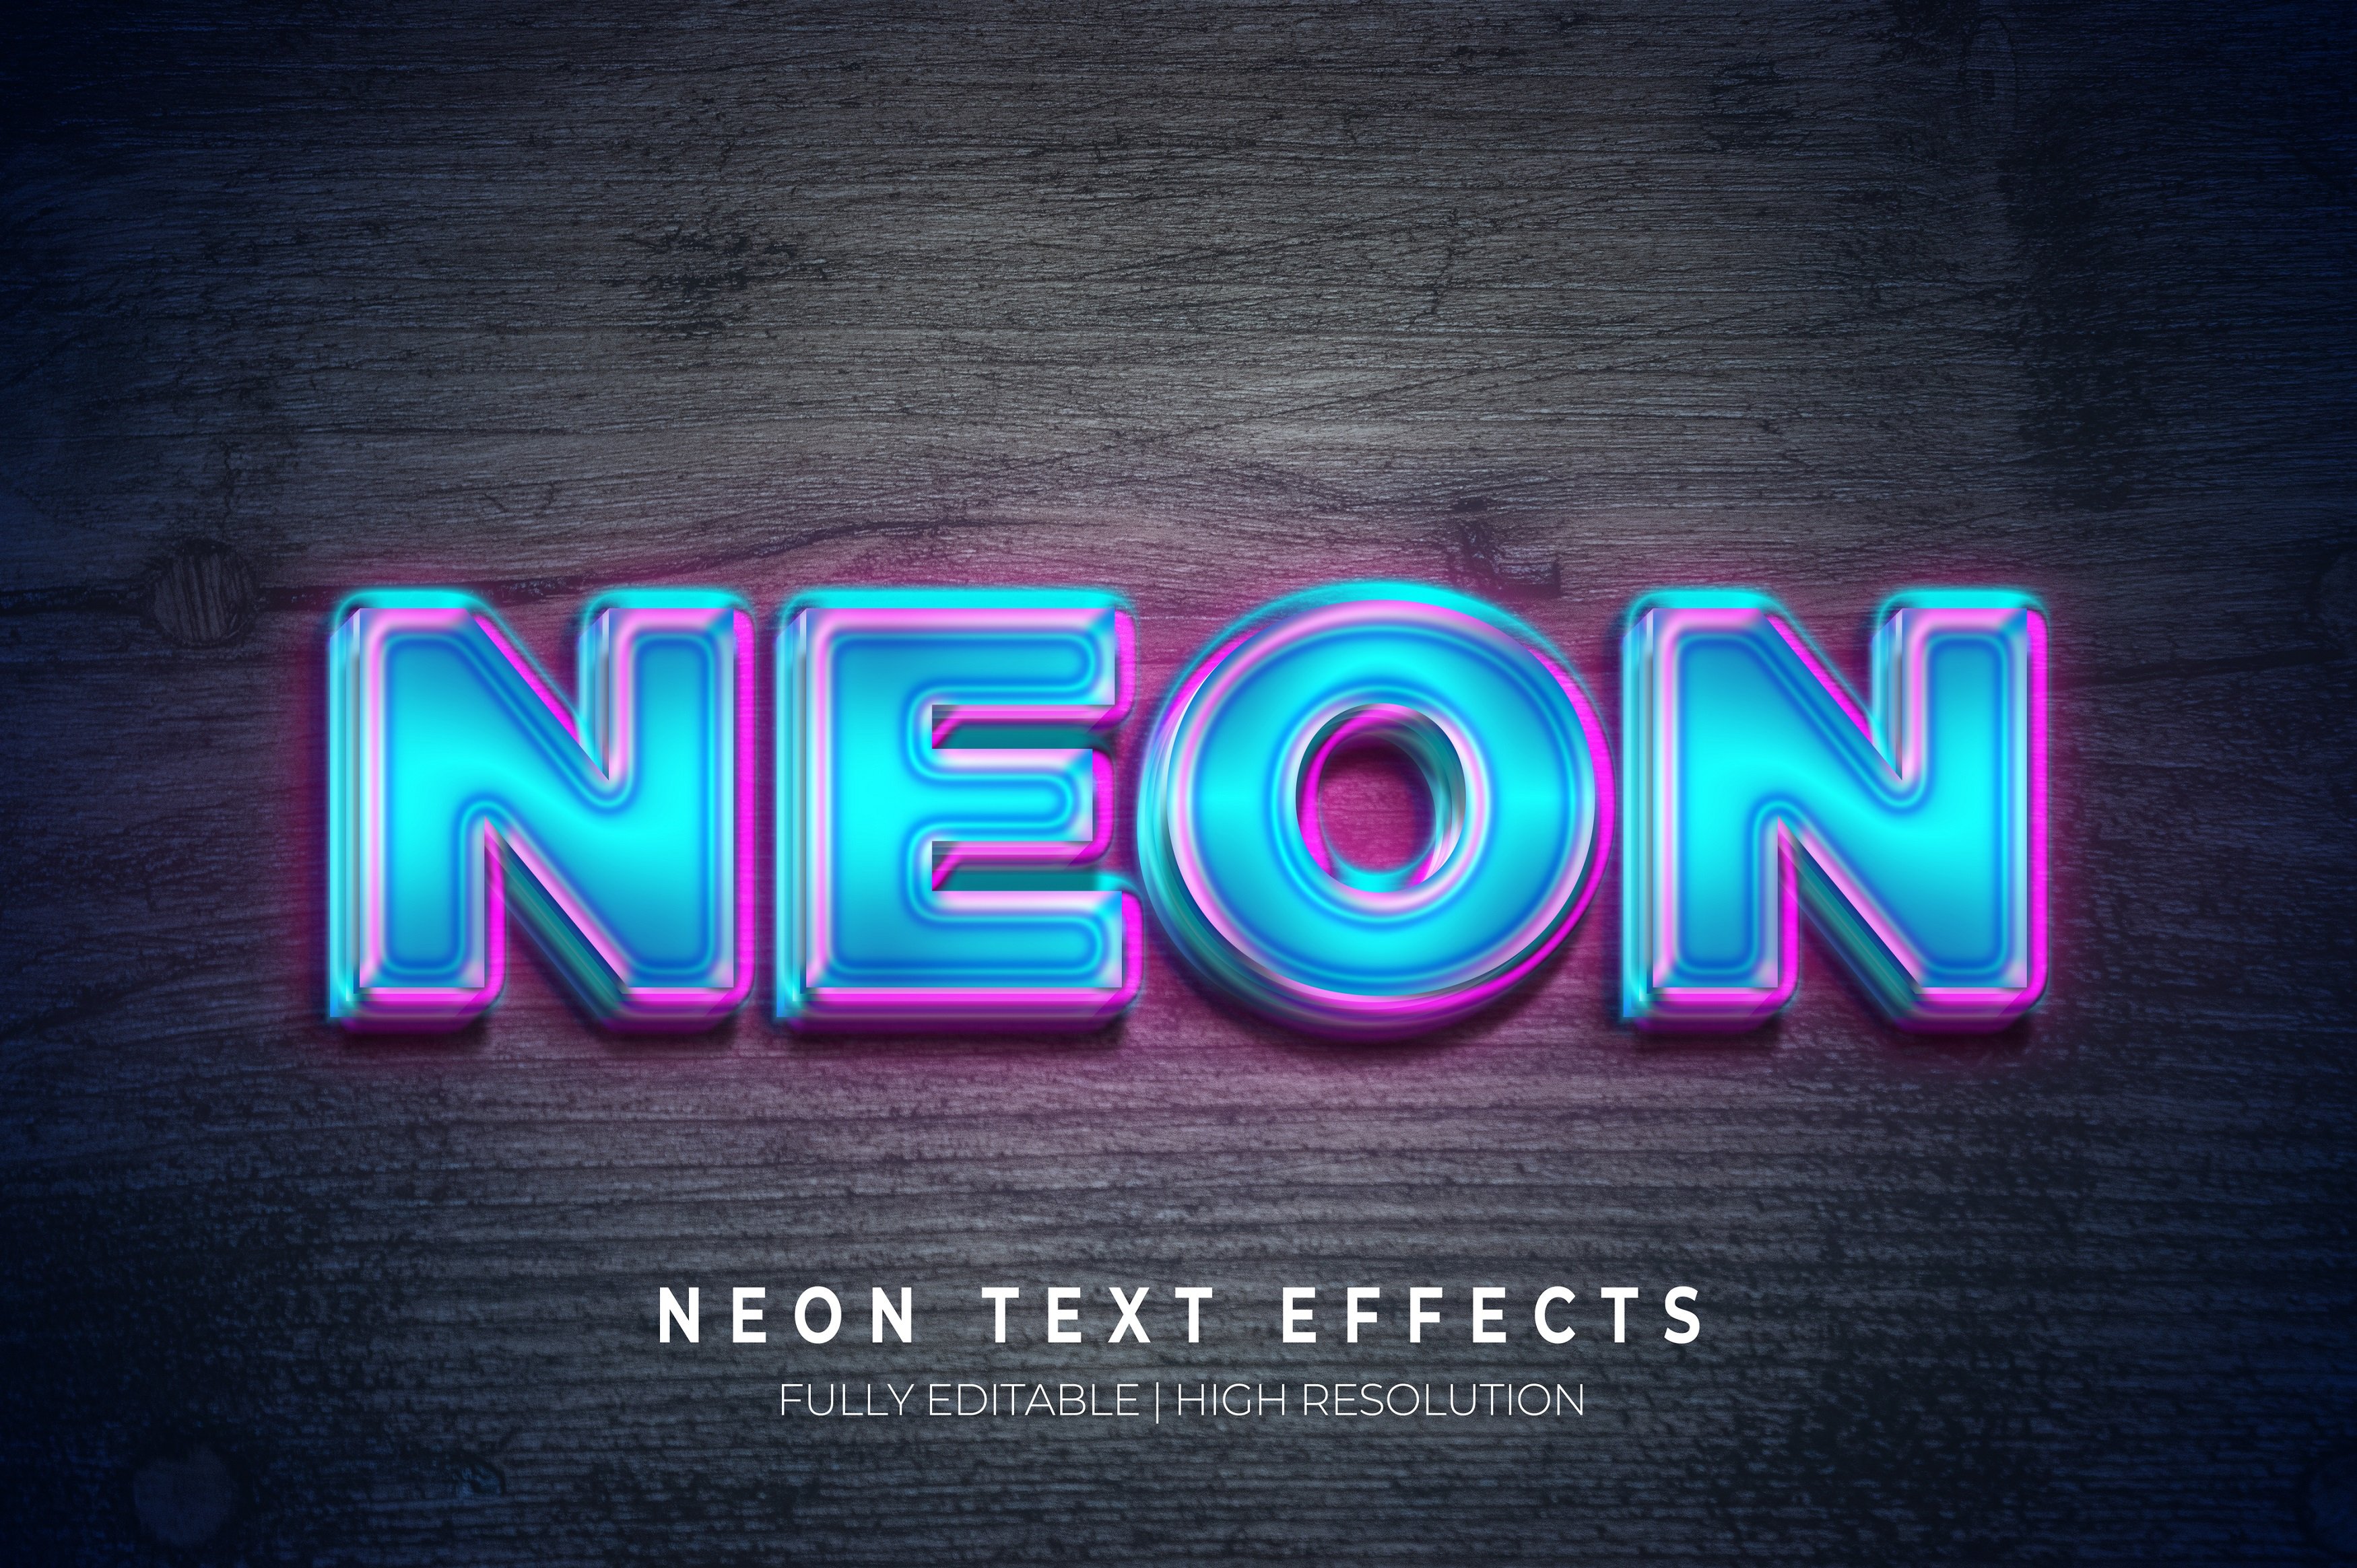 Neon Text Style Effect Mockupcover image.